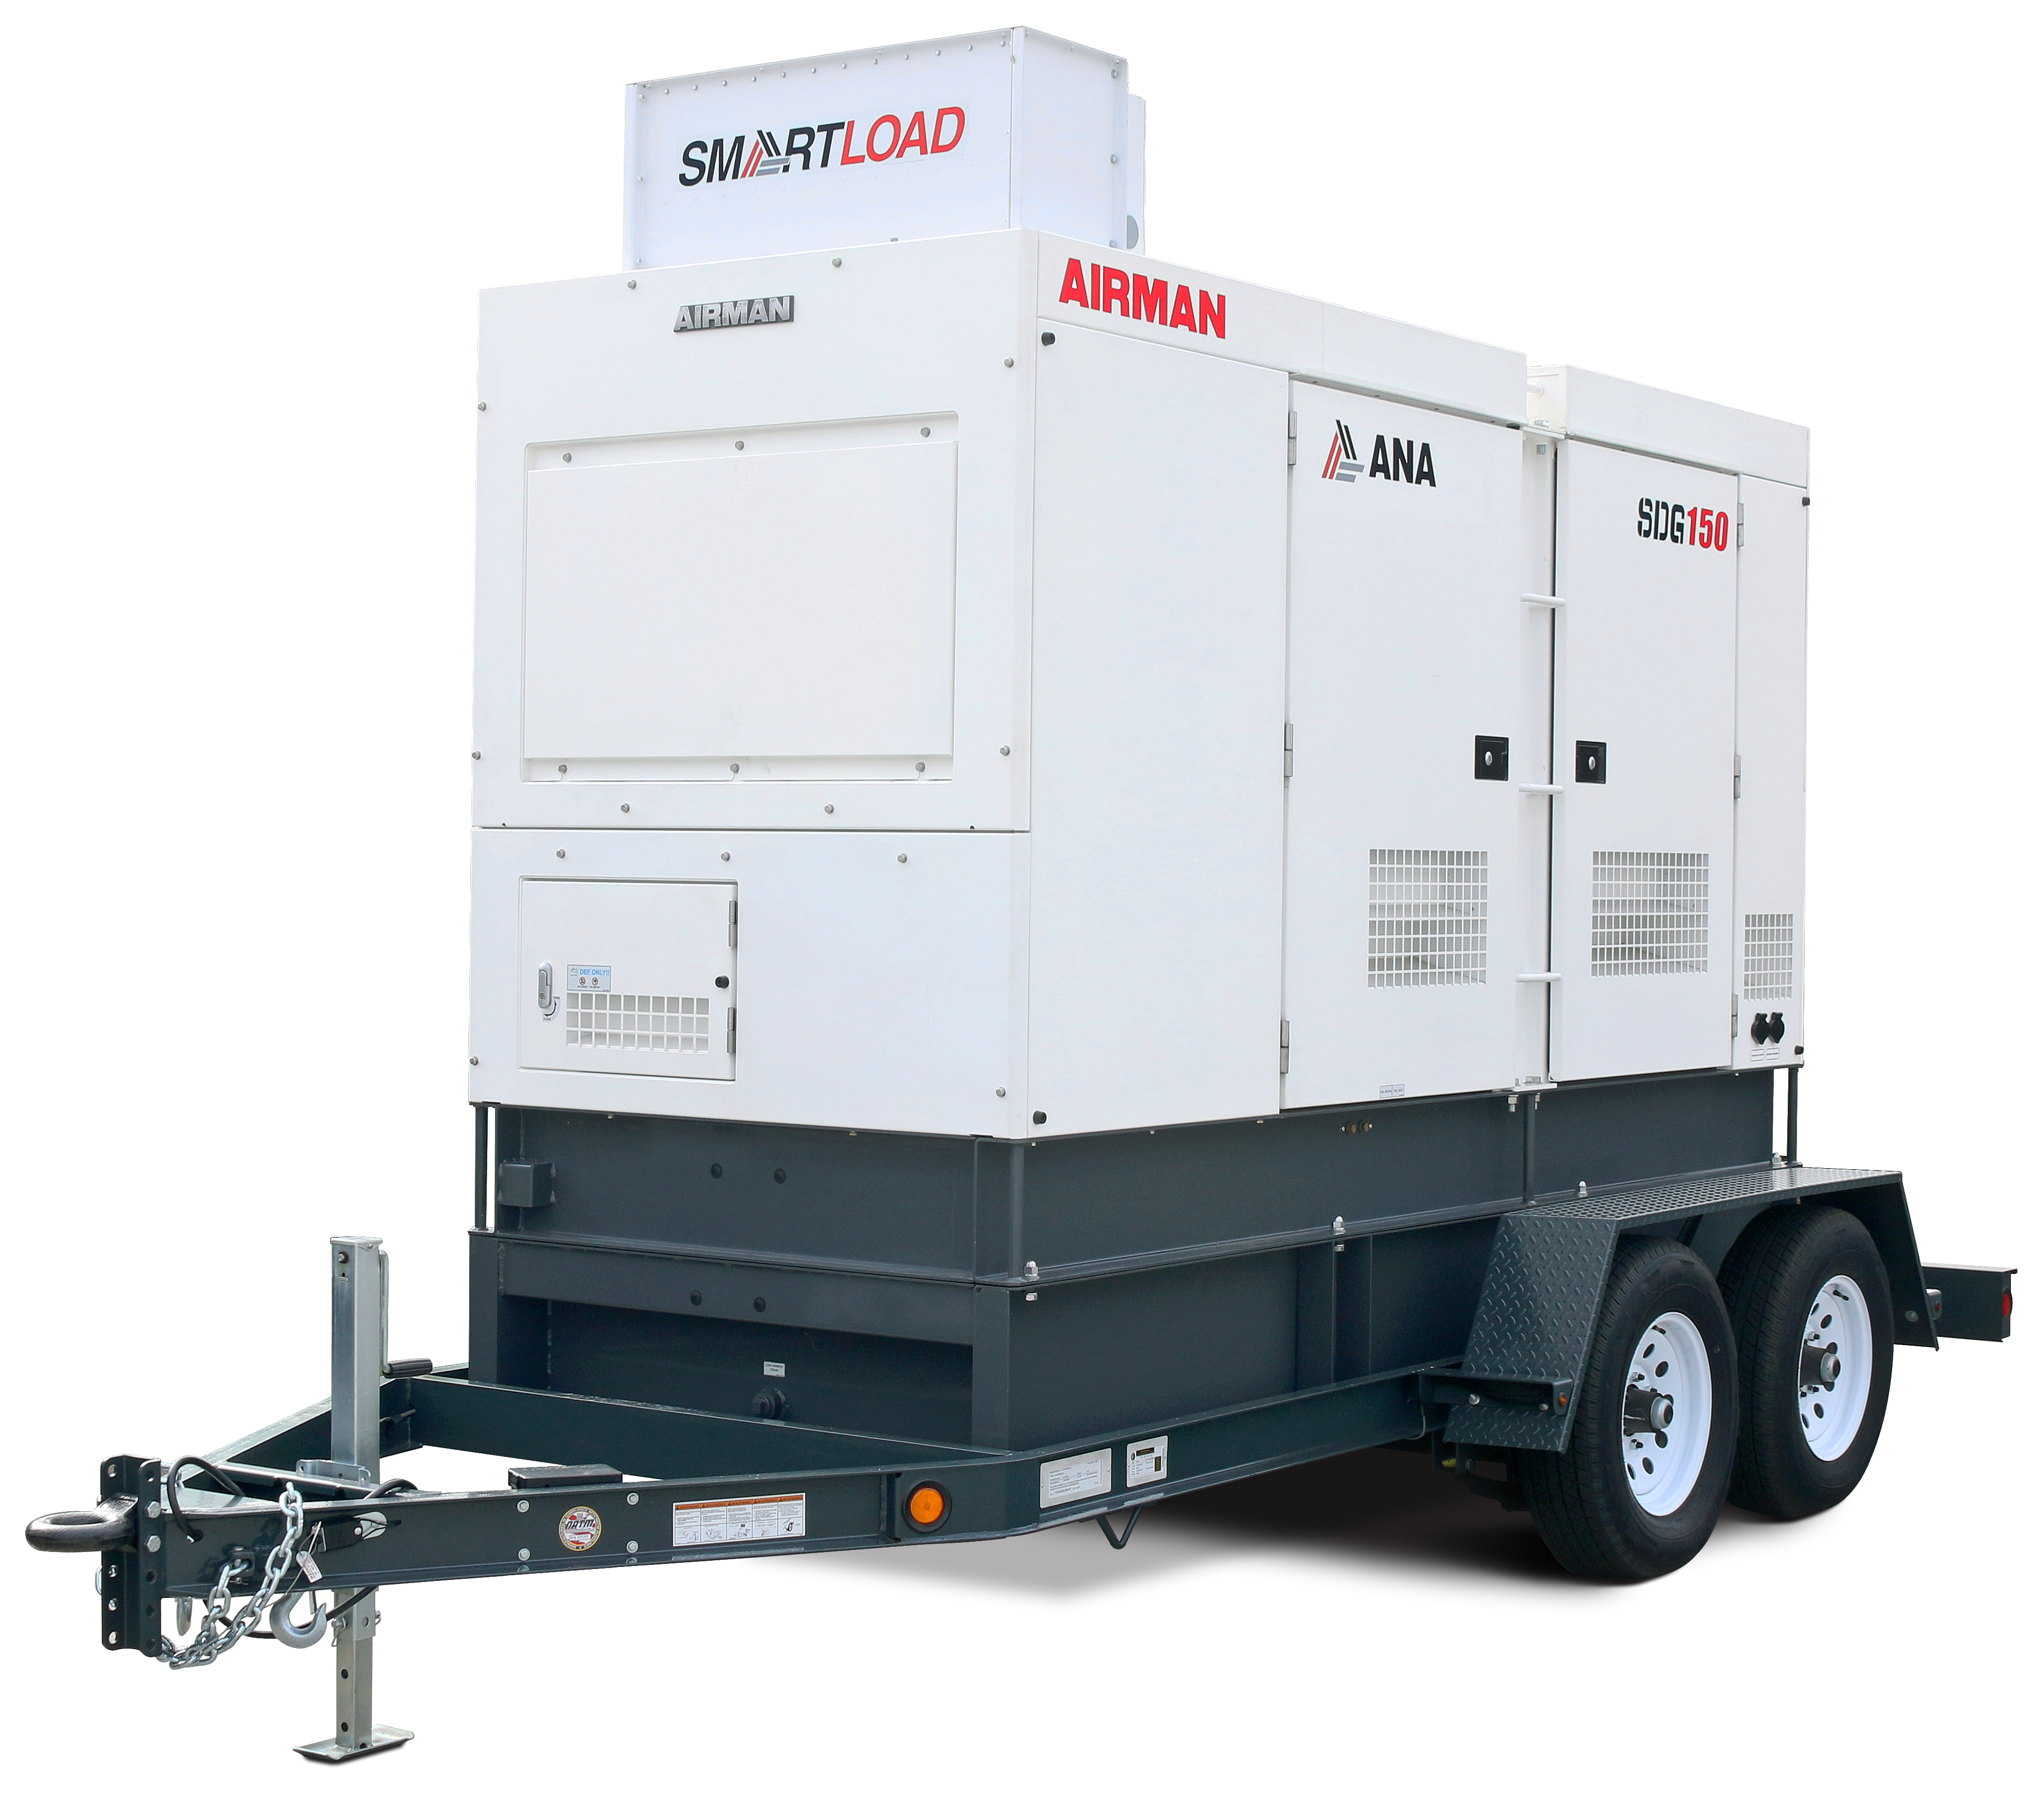 AIRMAN’s 150 kVA prime power generator provides 394 amps at three-phase 208 volt, 180 amps at 480 volt and over 360 amps in single phase 240 volt. You get over 24-hour runtime at full load, and at 66 dBA it is the quietest in the industry.